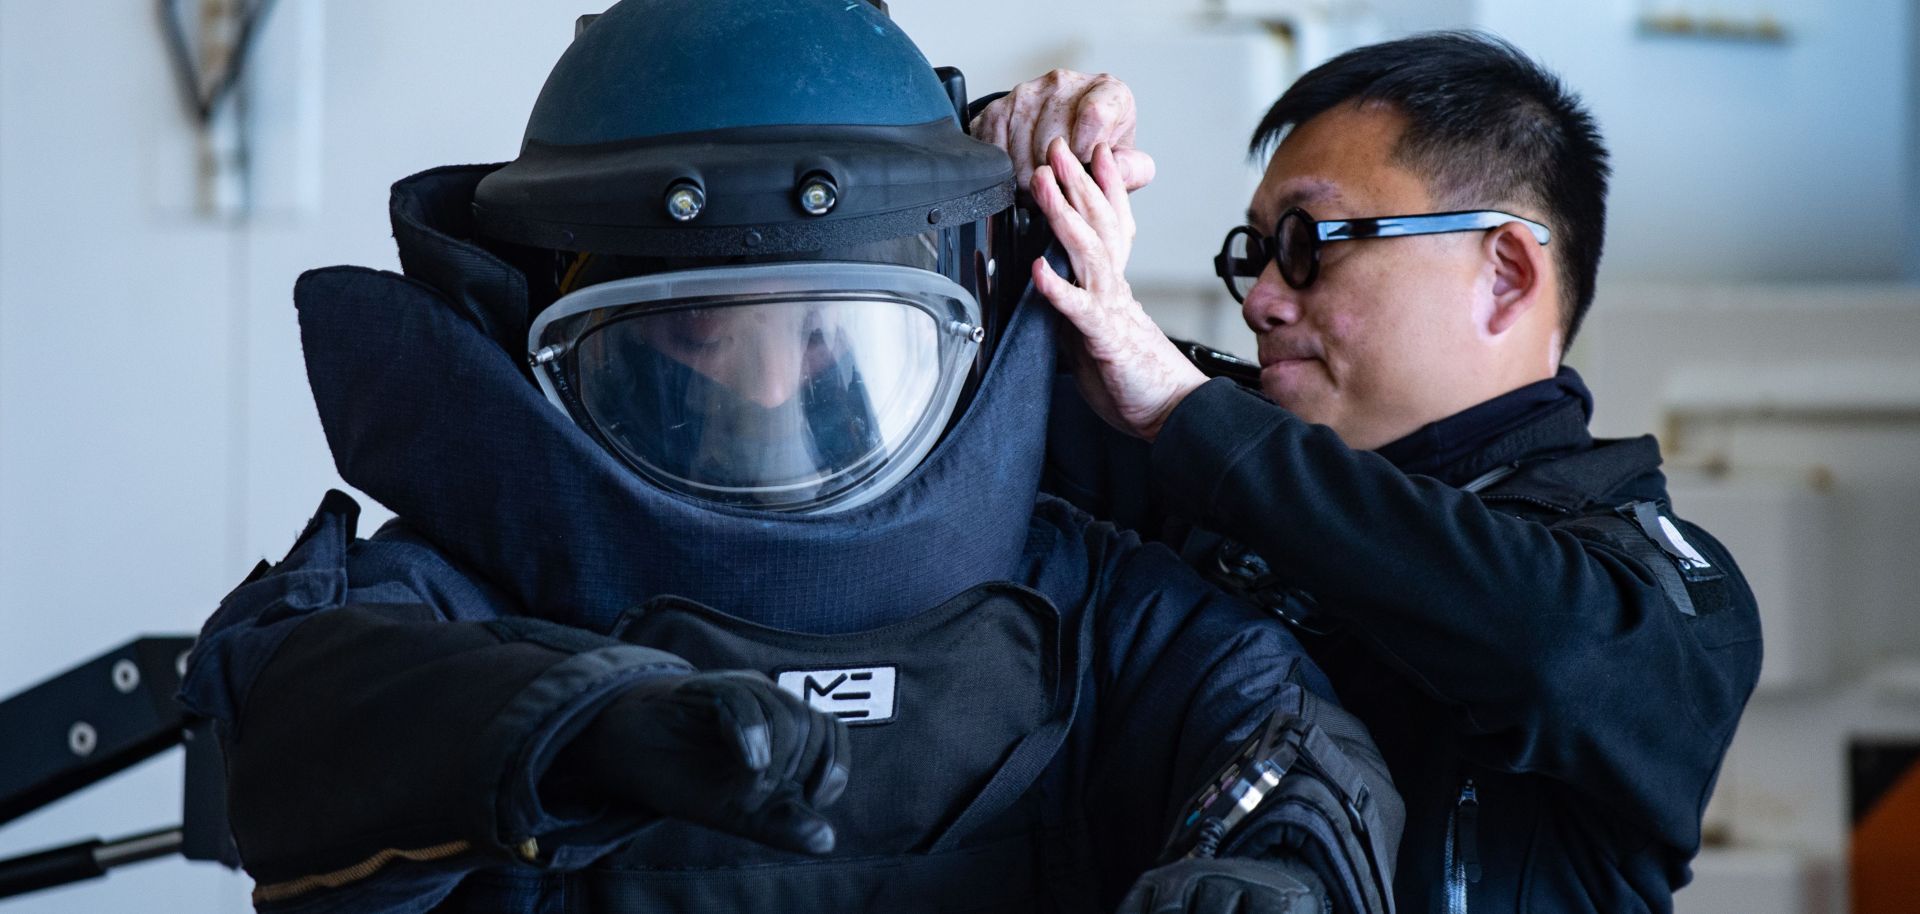 A police officer wears a bomb suit during a Dec. 6 event hosted by the Hong Kong Police Department's Explosive Ordnance Disposal Bureau (EOD).